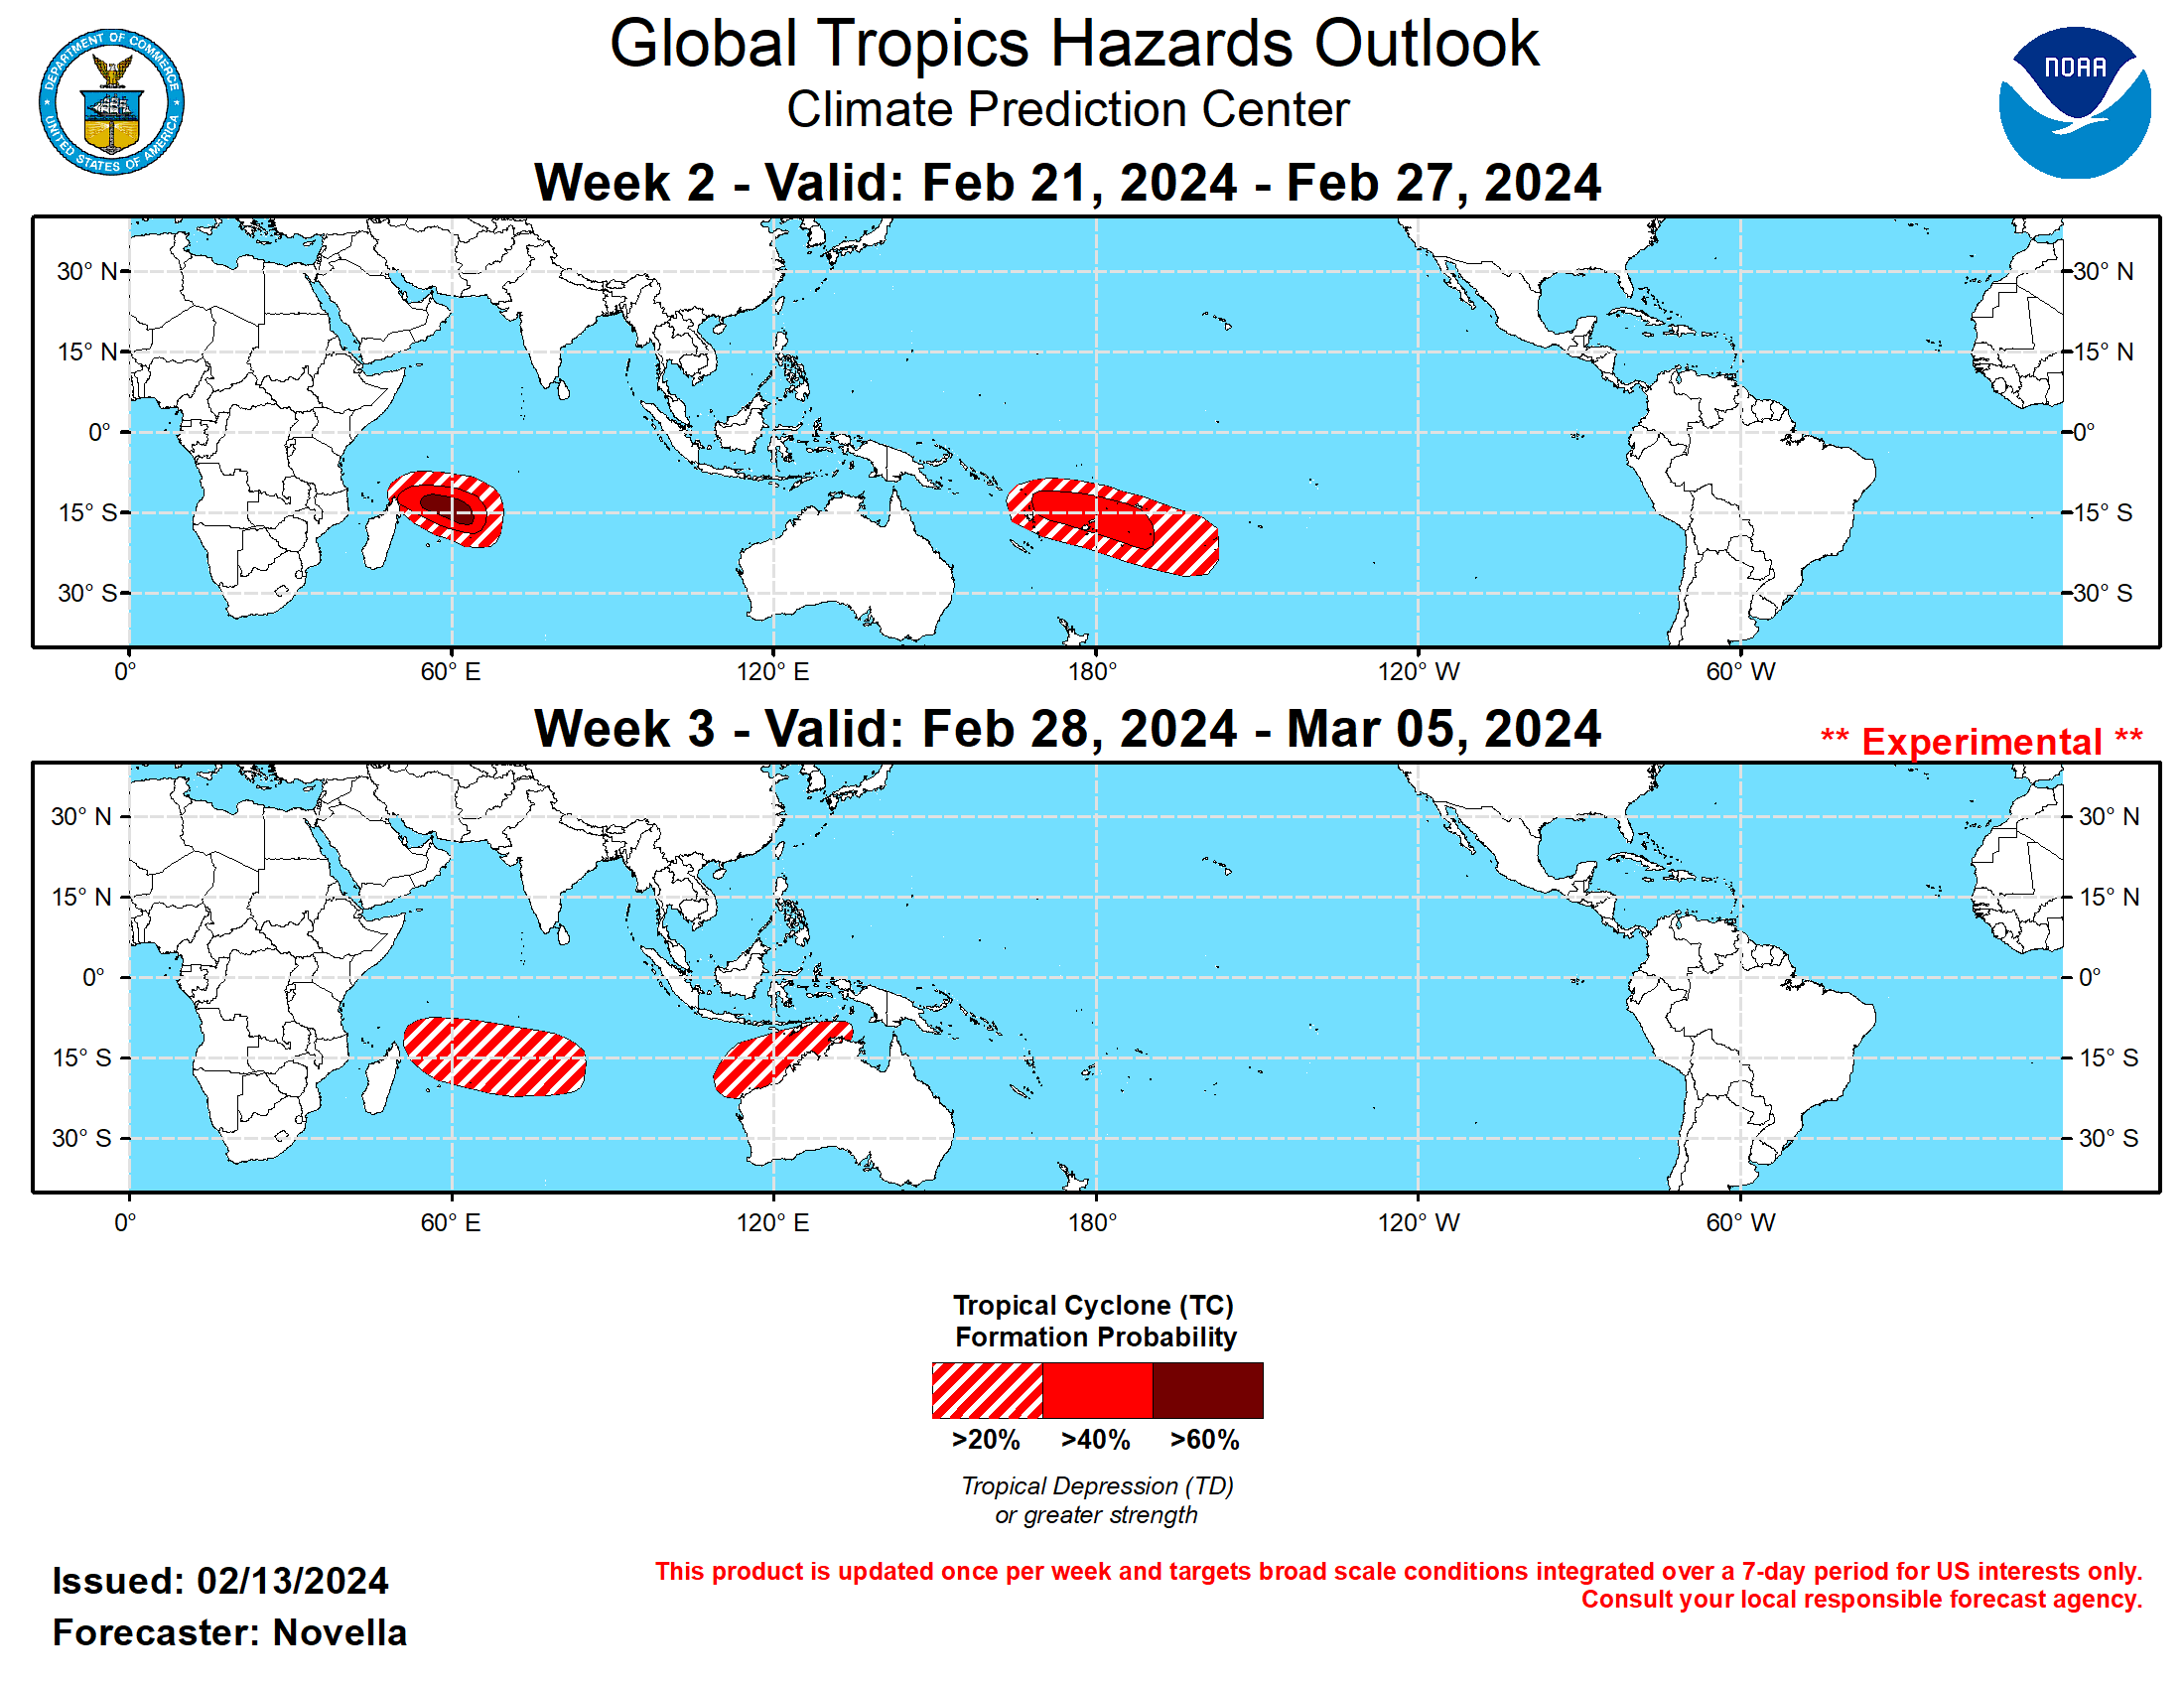 GTH Outlook Discussion Last Updated - 02/13/24 Valid - 02/21/24 - 03/05/24 Since earlier this month, RMM observations show a westward retreat of the MJO signal over the western Pacific, followed by the resumption of a more canonical eastward propagation where it has recently entered the Western Hemisphere (phase 8). The observed behavior appears to be tied to a fairly strong Rossby wave activity in the global tropics which led to a breakdown of the wave-1 spatial pattern in the upper-level velocity potential anomaly fields during the past week. Looking ahead, RMM forecasts have been consistent in favoring a weakened and incoherent MJO through late February, as models remain nearly unanimous with the signal falling within the unit circle in the next two weeks. However, analysis of several MJO variable forecasts reveal a more coherent MJO perspective, and the thinking is that the disorganizing MJO favored in the RMM forecasts may be more of an undesired effect of RMM methodology. A comparison of RMM indices with and without the 120-day running mean shows a sharp left-to-right shift of values in phase space, where the positive Indian Ocean Dipole (+IOD) event that peaked this past fall appears to be exerting a dominating influence in the mean. Because this low frequency response is no longer evident in the tropical circulation (namely, in the absence of enhanced lower-level easterlies over the Indian Ocean), the RMM forecasts may be overcorrecting themselves to the right along the RMM 1 axis, where the eastward propagating signals favored in the Western Hemisphere (phases 8 and 1) are actually higher in amplitude than what is being depicted.  As a result, this would suggest stronger MJO activity in the outlook, which is supported by upper-level velocity potential anomaly forecasts favoring more of a wave-1 pattern during the next several weeks. Though, it should be noted that even with this RMM biasing, there remains some uncertainty with the evolution of the MJO given a tendency in the model solutions for faster propagation speeds. This is still contributing to high ensemble spread, placing the enhanced envelope at different phases at the longer leads, which is also featured in the upper-level velocity potential forecasts between the ECMWF and GEFS. Regardless of these differences with timing, the large-scale environment is expected to be favorable for tropical cyclogenesis over the southern Indian Ocean, with increasingly less favorable conditions for additional Tropical Cyclone (TC) formation over the South Pacific heading into early March.  During the past week, two TCs developed in the South Pacific associated with a very strong band of anomalous lower-level westerlies ongoing to the south of the equator. TC Osai formed on 2/7 a few hundred miles northwest of American Samoa. This system tracked southeastward and peaked at Tropical Storm intensity before encountering a more hostile environment and quickly dissipating to the north of the Cook Islands on 2/8. Around the same time, TC Twelve formed further west in the Coral Sea and tracked to the east while peaking at Tropical Storm strength. TC Twelve weakened to a Tropical Depression and dissipated to the west of the Fiji Islands on 2/11, however ensemble solutions maintain an area of depression near the Date Line, where reformation or a newly formed area of tropical low pressure is possible in the region during week-1.  The Joint Typhoon Warning Center (JTWC) is currently monitoring an area (90S) in the southern Indian Ocean for potential development this week. In the wake of this disturbance, there is good model support for additional TC development to the east of Madagascar, and probabilistic tools indicate higher chances of formation near 15S/60E compared to previous runs. Based on continued ensemble support and trend, 60% chances are issued in the region for week-2. In the South Pacific, both equatorial Rossby and Kelvin wave activity are favored in the basin, prompting 40% chances for additional TC development for week-2. Higher chances were considered, however the aforementioned anomalous lower-level westerlies in the South Pacific are predicted to rapidly ease and possibly flip to easterly during week-2, thereby limiting TC genesis potential. 20% chances for development were also considered to the north of Australia based on continued elevated signals from ECMWF probabilistic tool, however this part of the tropics appears more unfavorable with the suppressed phase of the MJO in the region.  For week-3, probabilistic TC genesis tools show increased chances for additional TC development across the southern Indian Ocean, consistent with the enhanced phase of the MJO moving into the basin. However, lower-level wind anomaly forecasts are fairly muted and 20% chances are posted in the outlook. 20% chances are also issued to the north of Australia based on increased signals in the probabilistic tools. Although probabilistic tools feature some modest signals in the South Pacific, no shapes are posted in the basin due to the suppressed phase of the MJO moving into the basin to inhibit development.